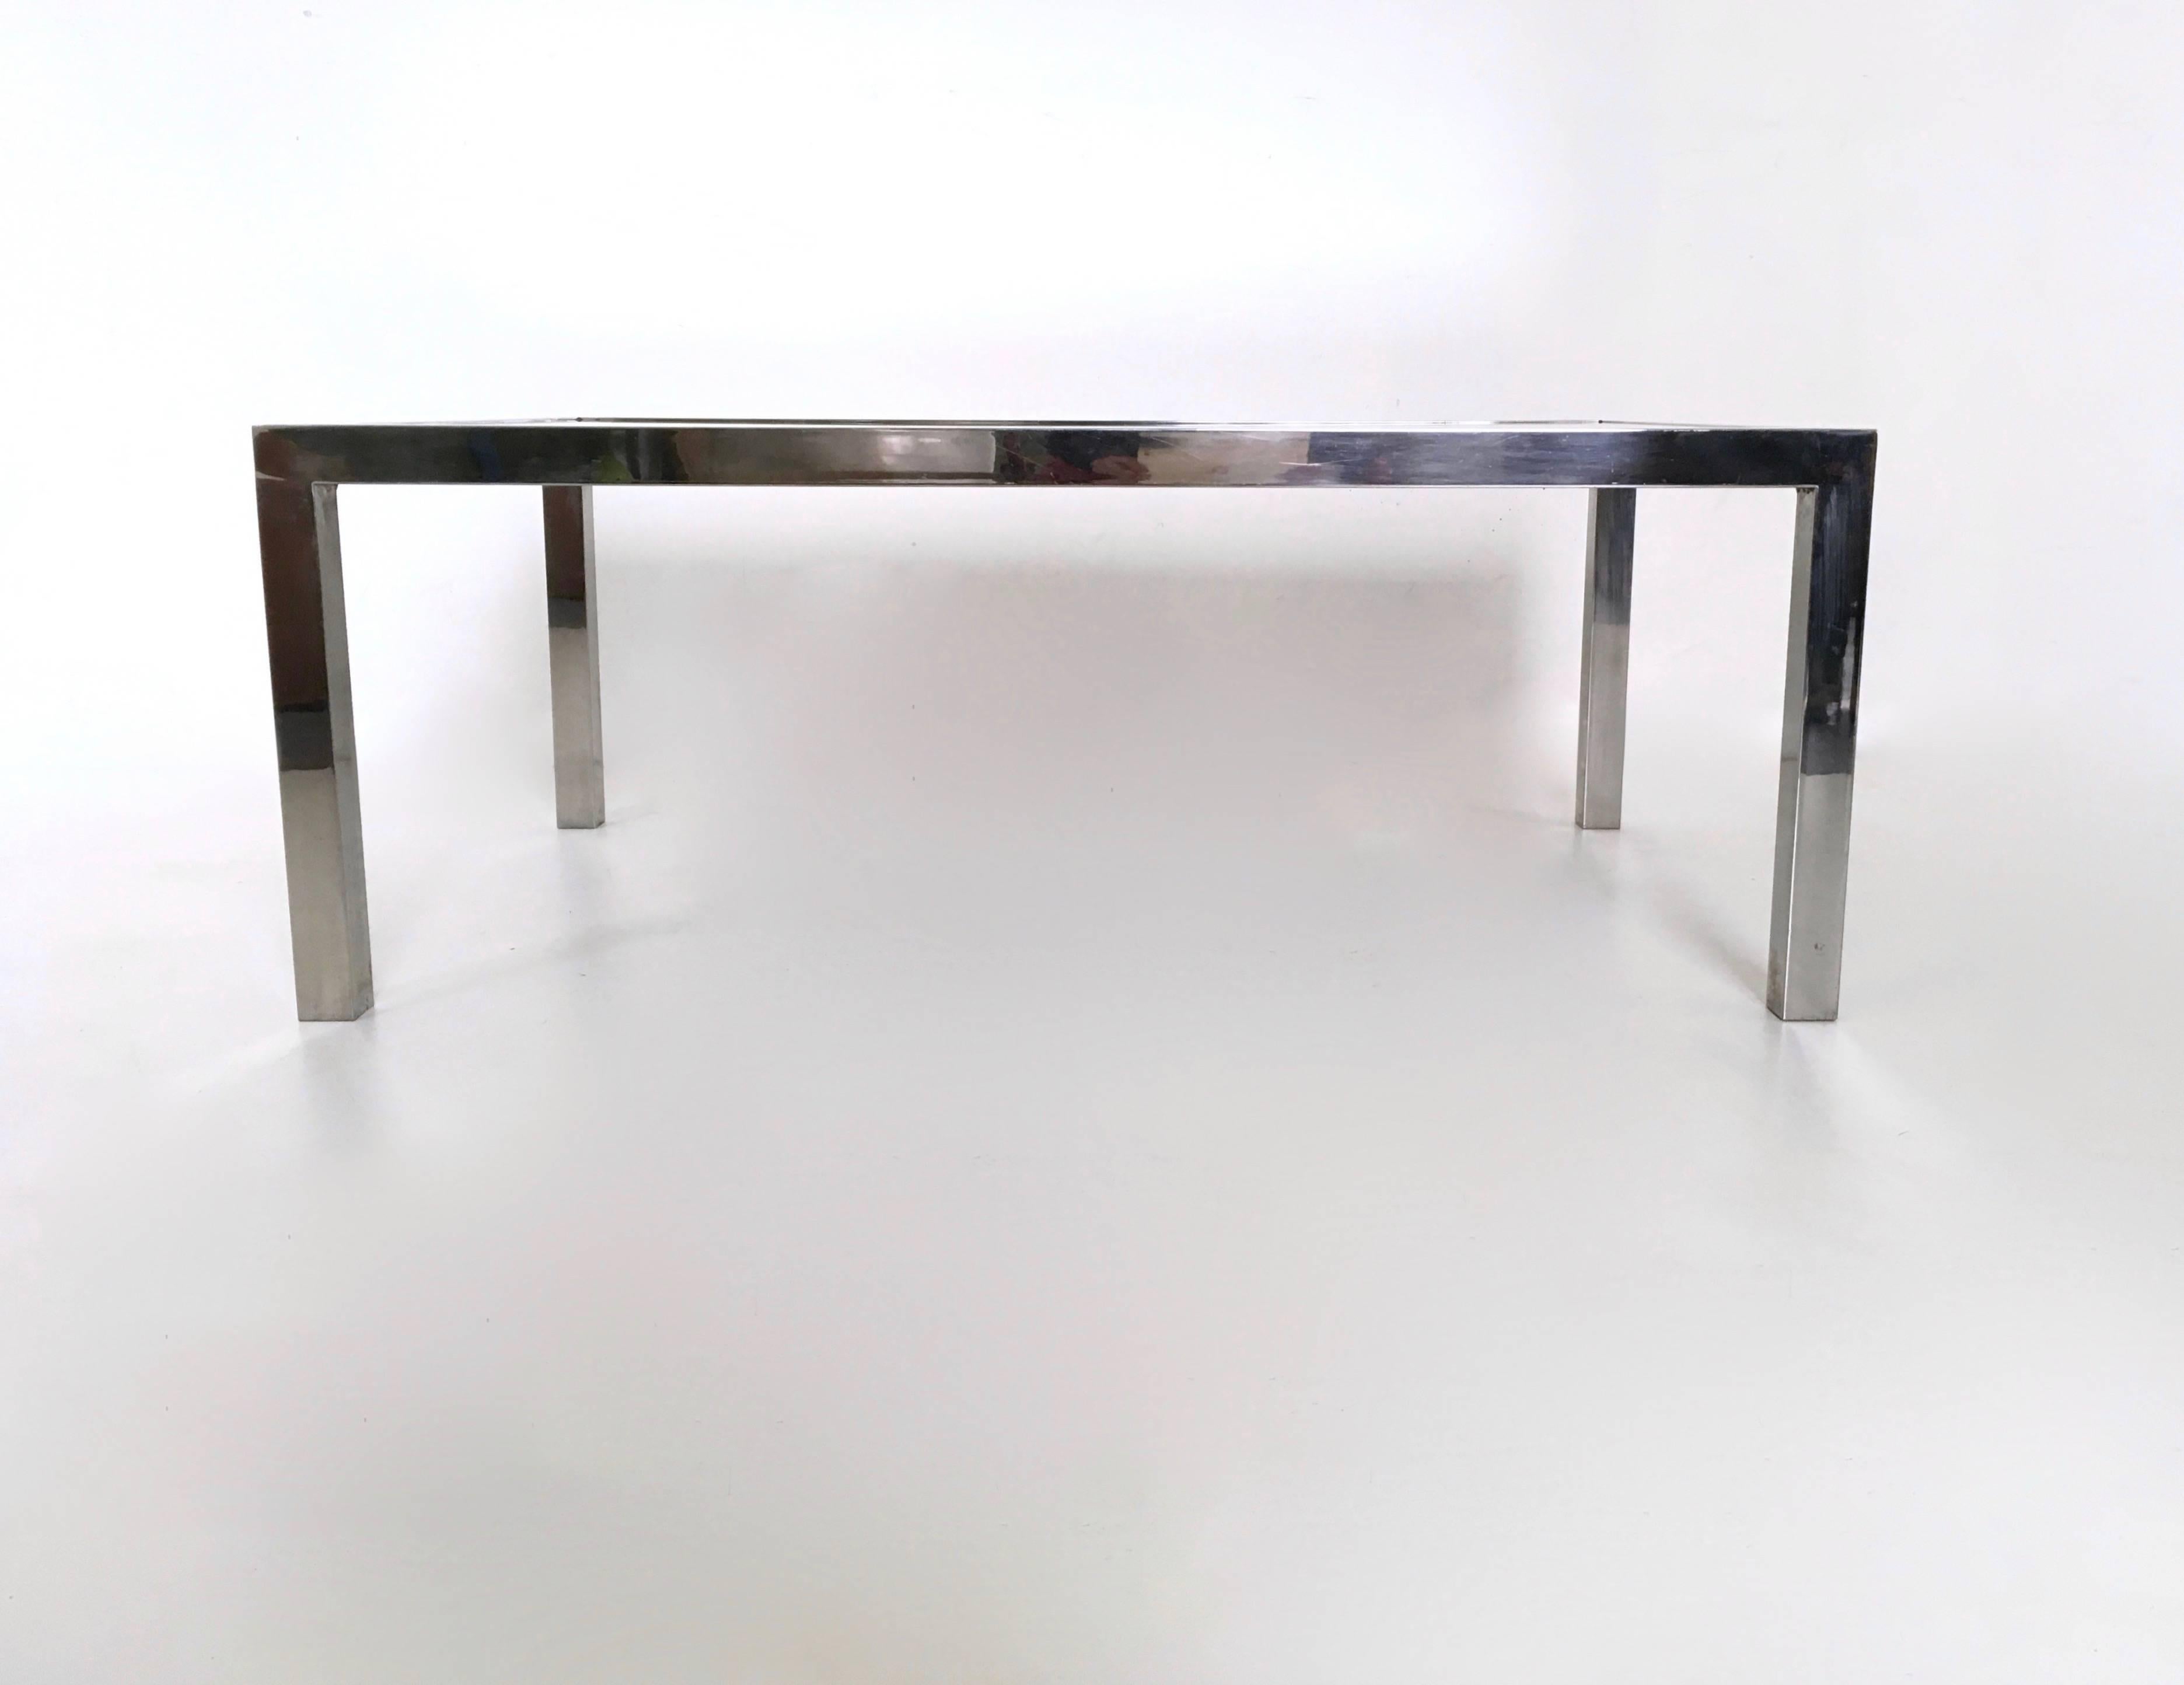 Late 20th Century Vintage Steel Coffee Table in the Style of Nanda Vigo with a Mirrored Top, Italy For Sale